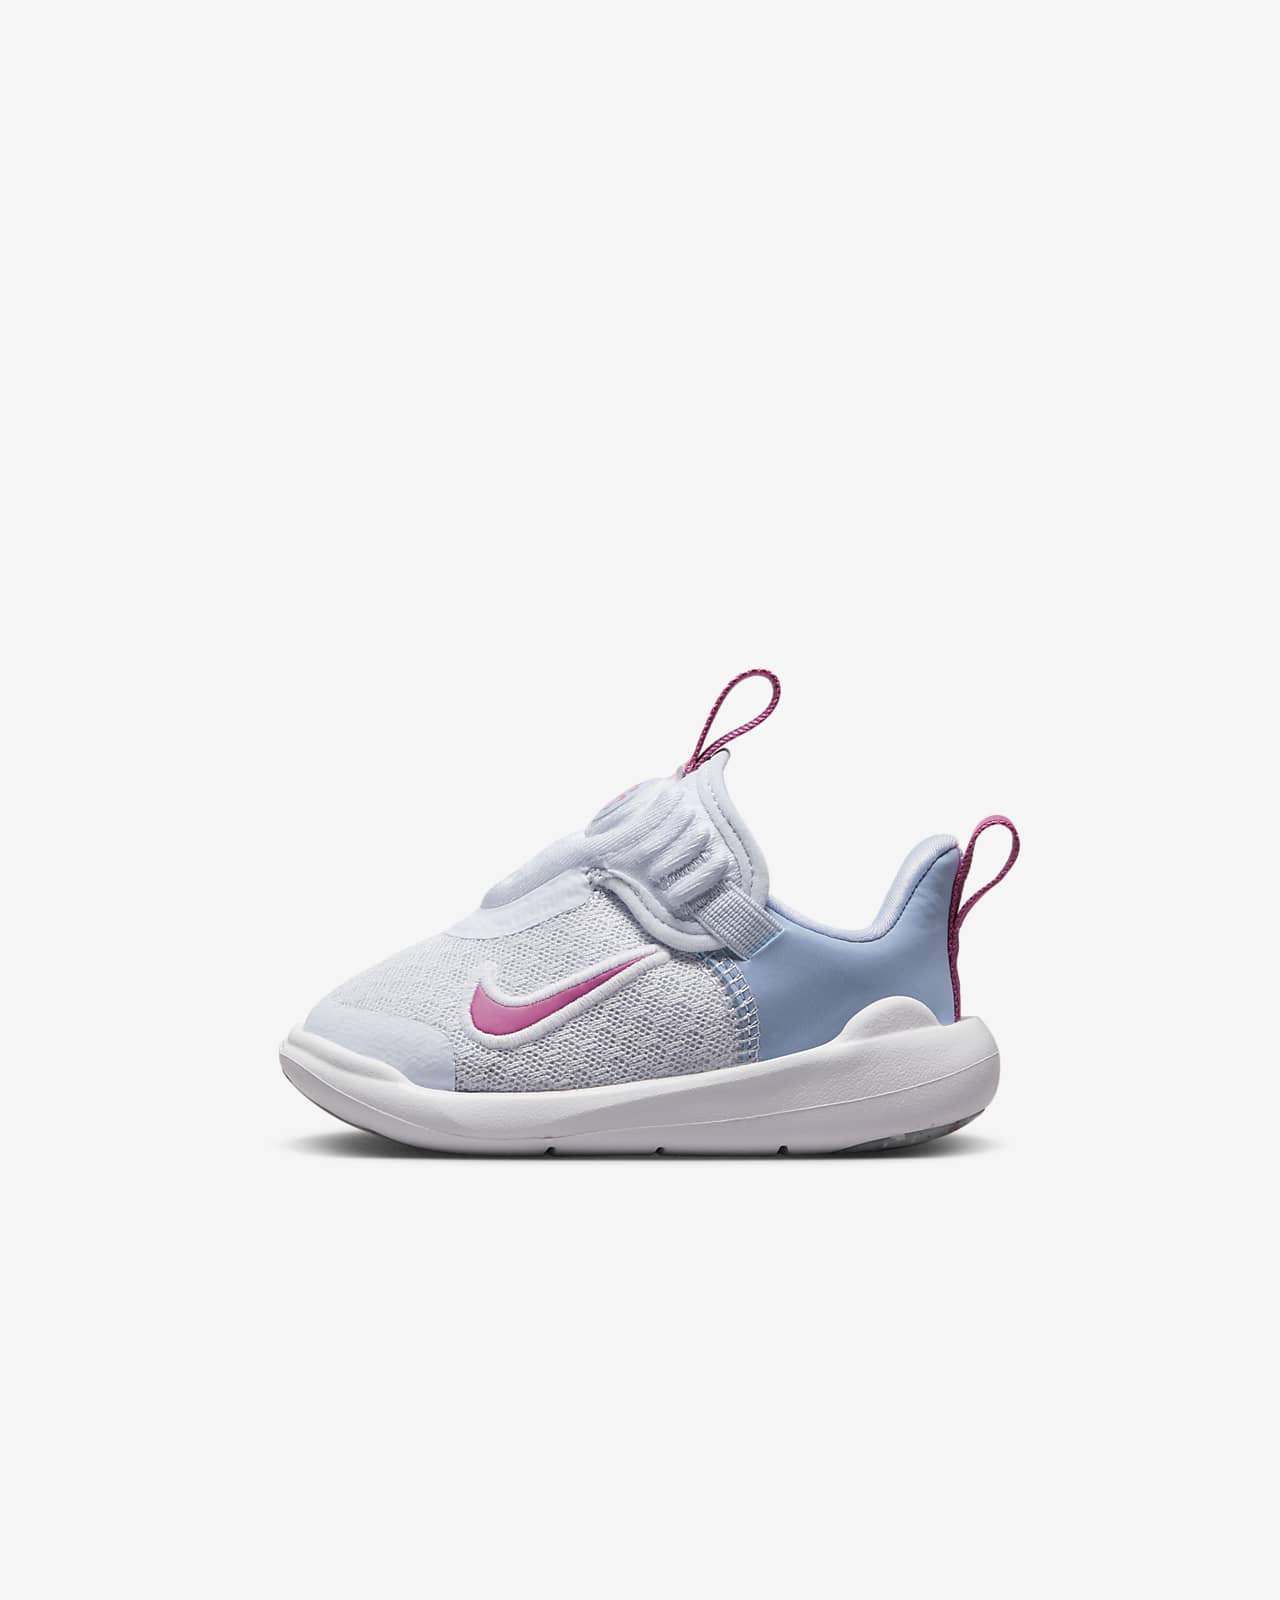 Nike E-Series 1.0 Baby/Toddler Shoes